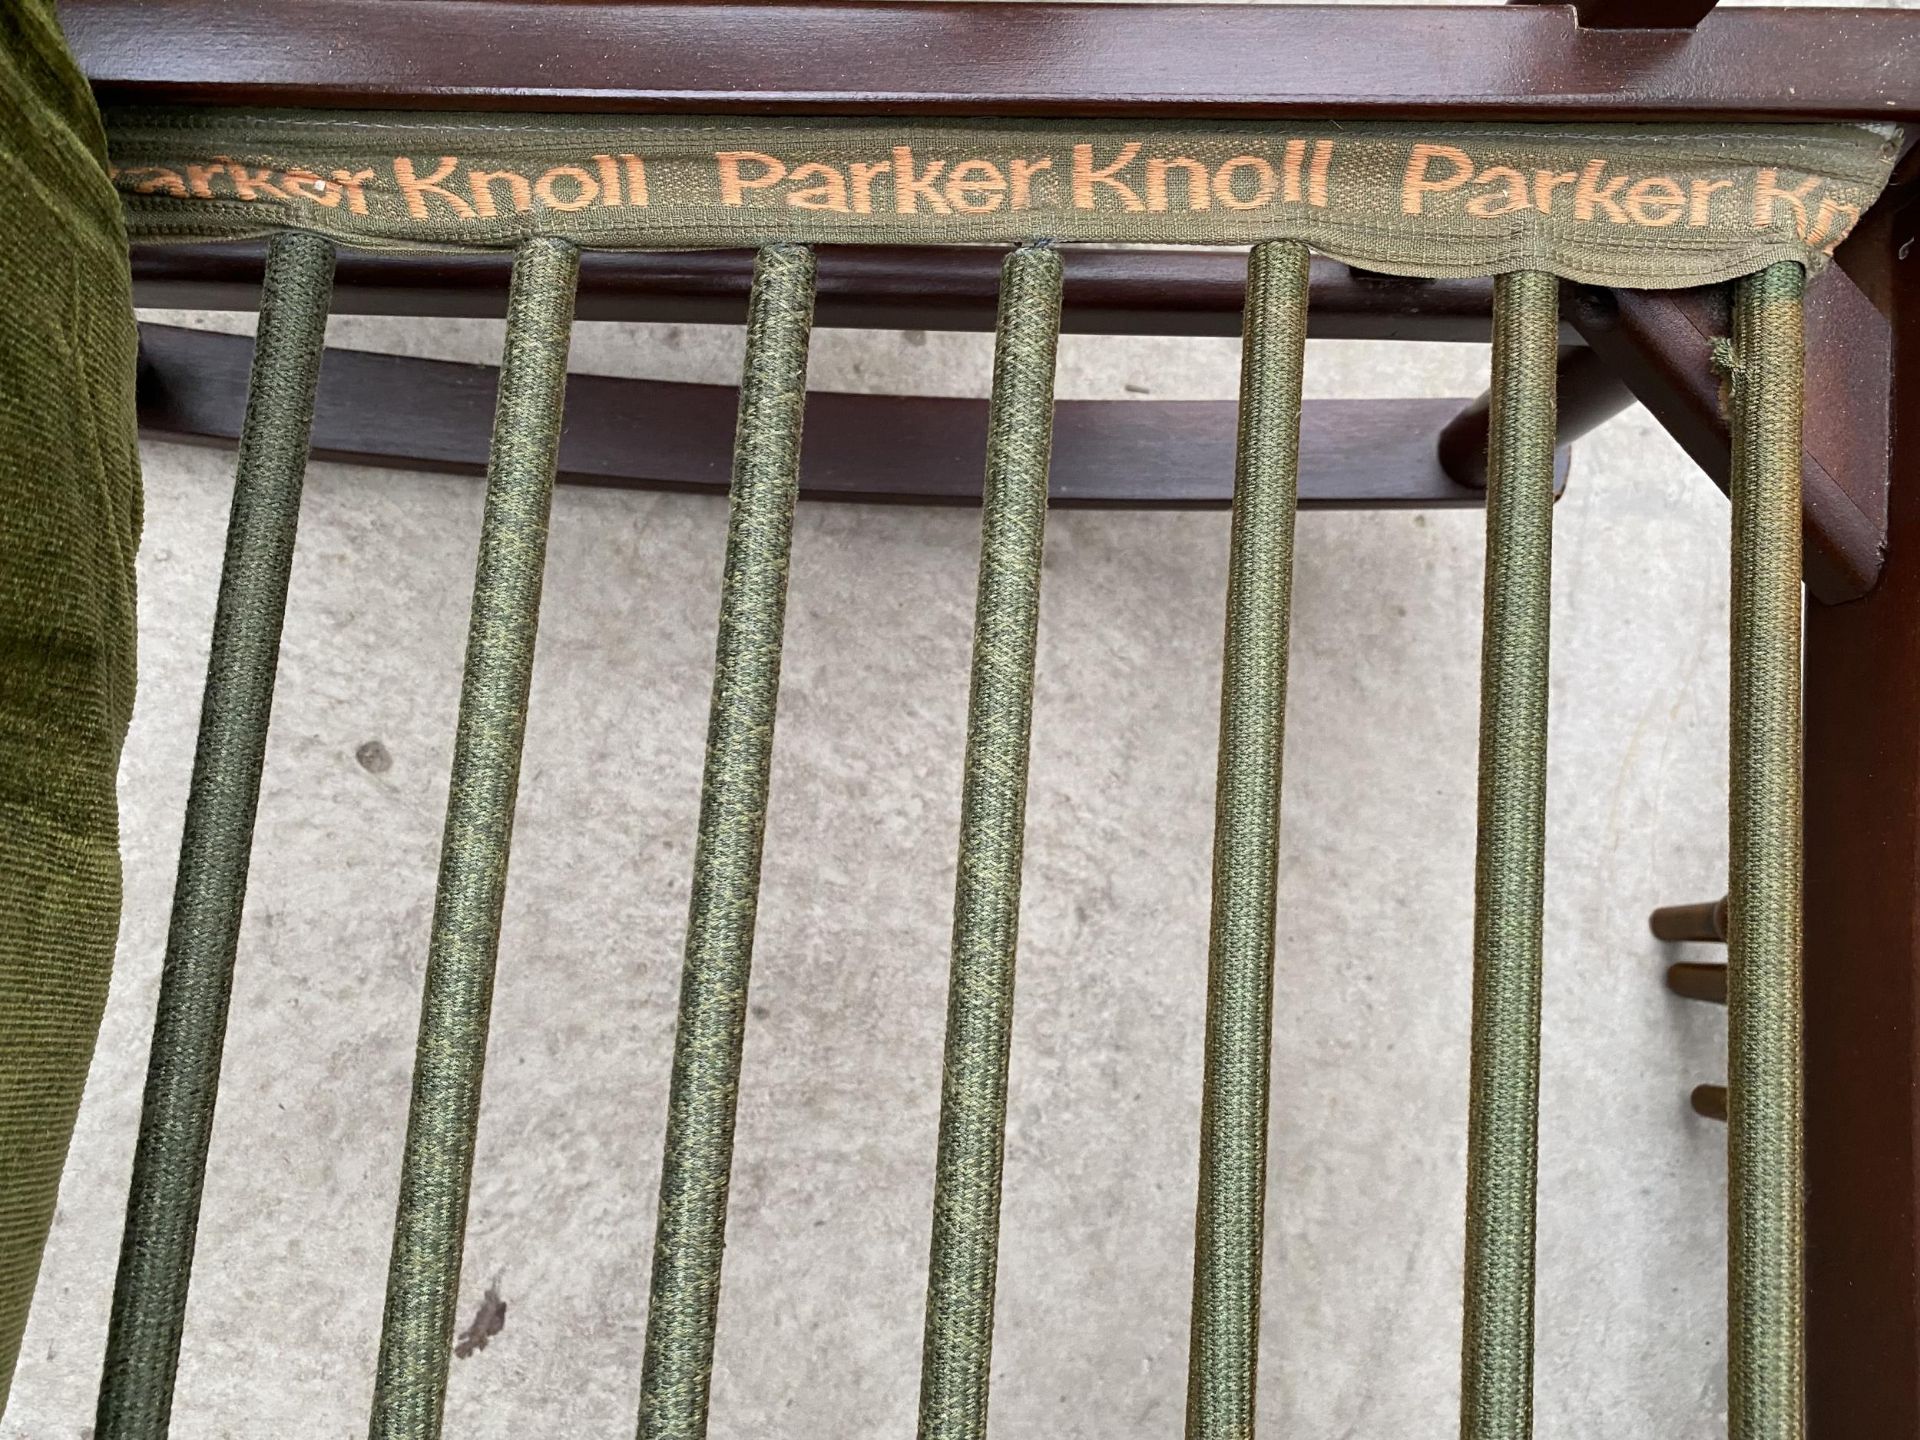 A PARKER KNOLL ROCKING CHAIR - Image 3 of 5